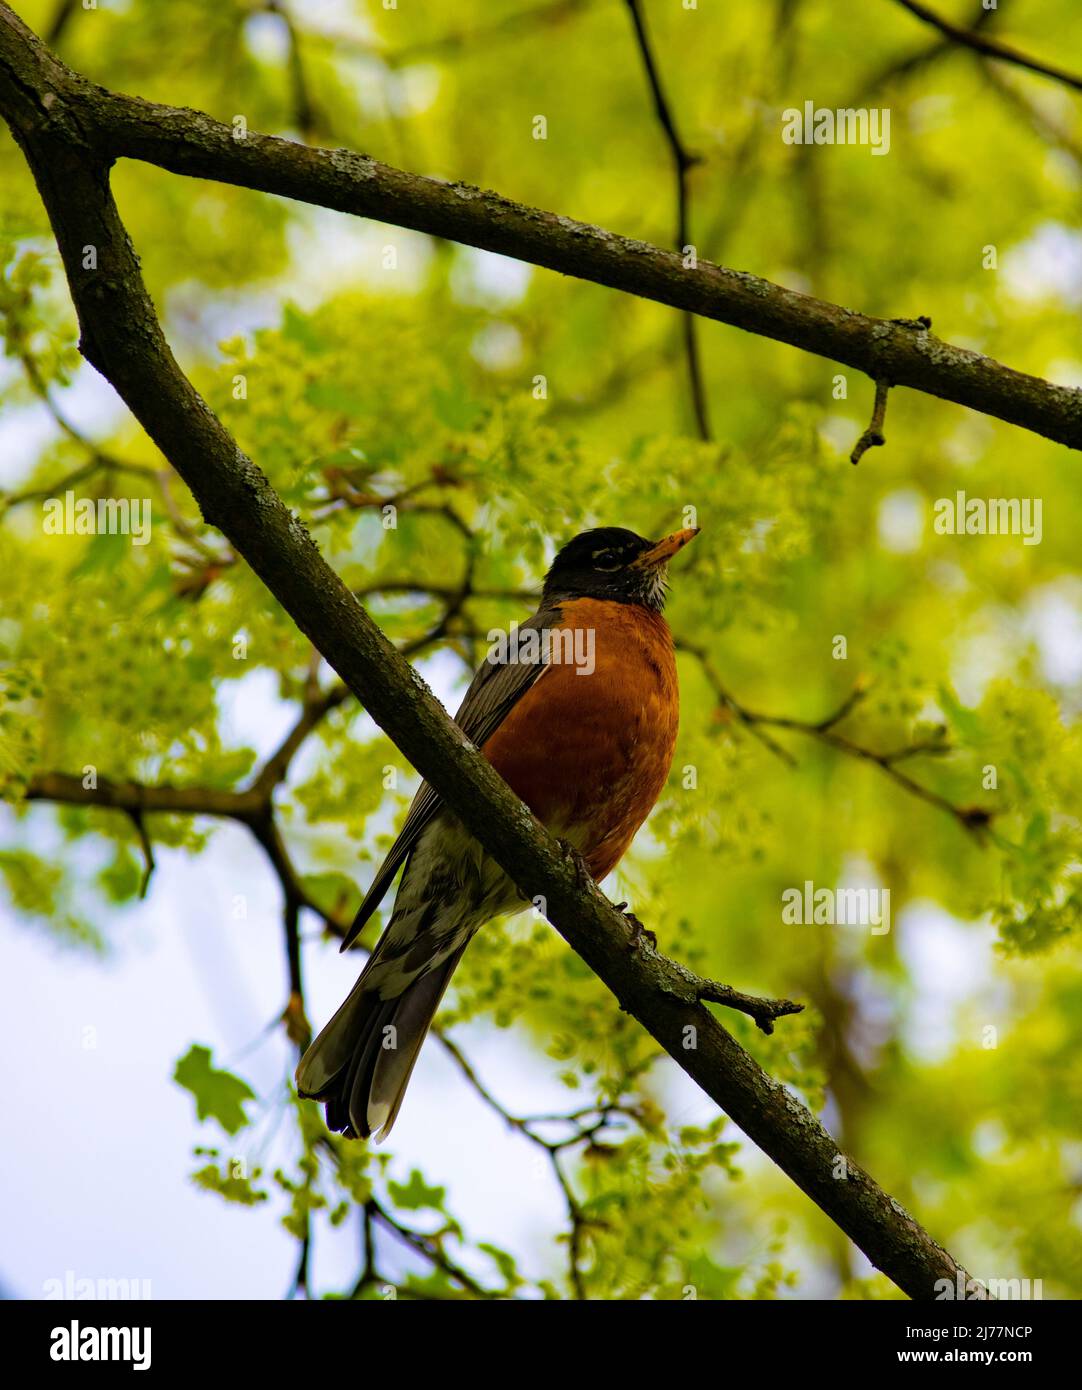 A lone Robin bird perching on a maple tree branch in early spring - stock photography Stock Photo